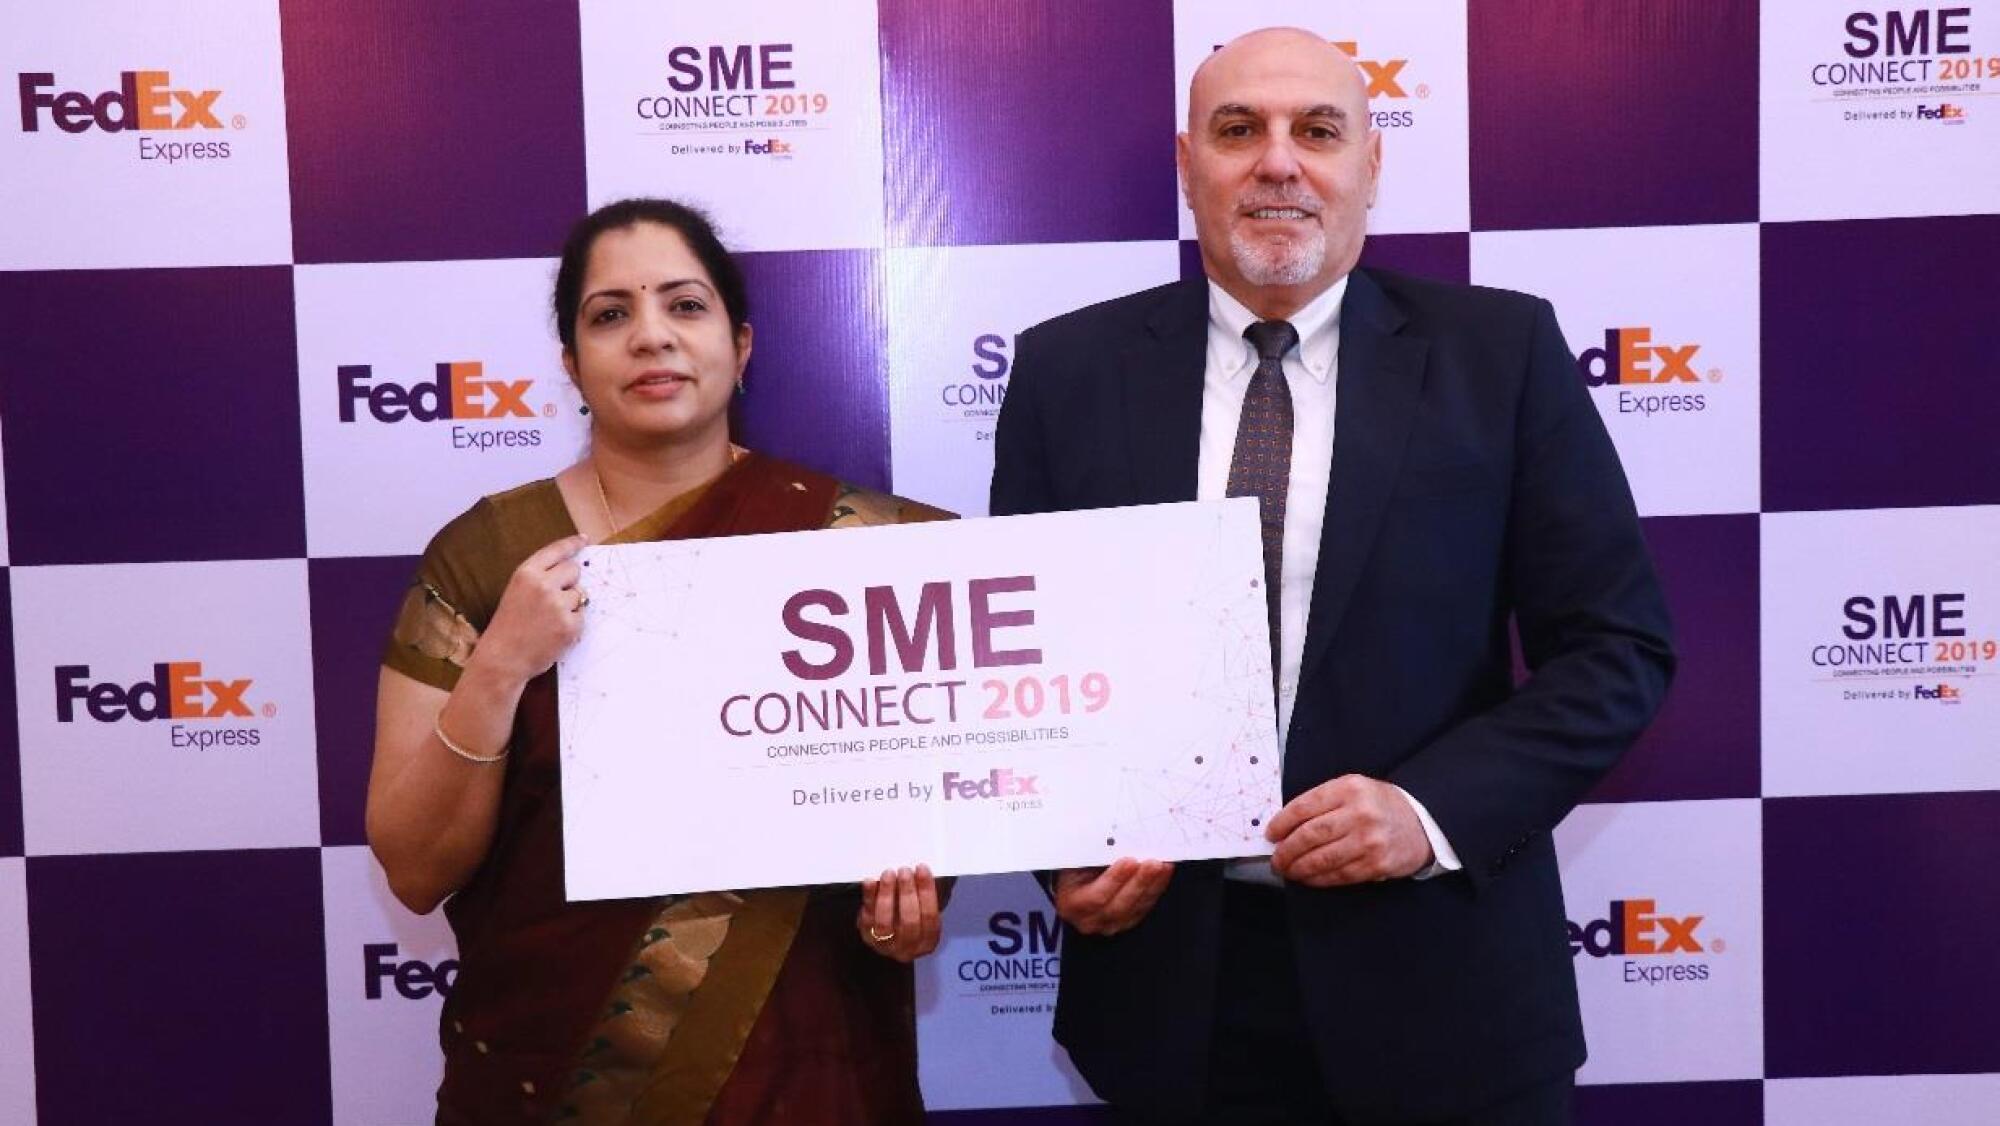 fedex-sme-connect-program-empowers-small-businesses-to-access-new